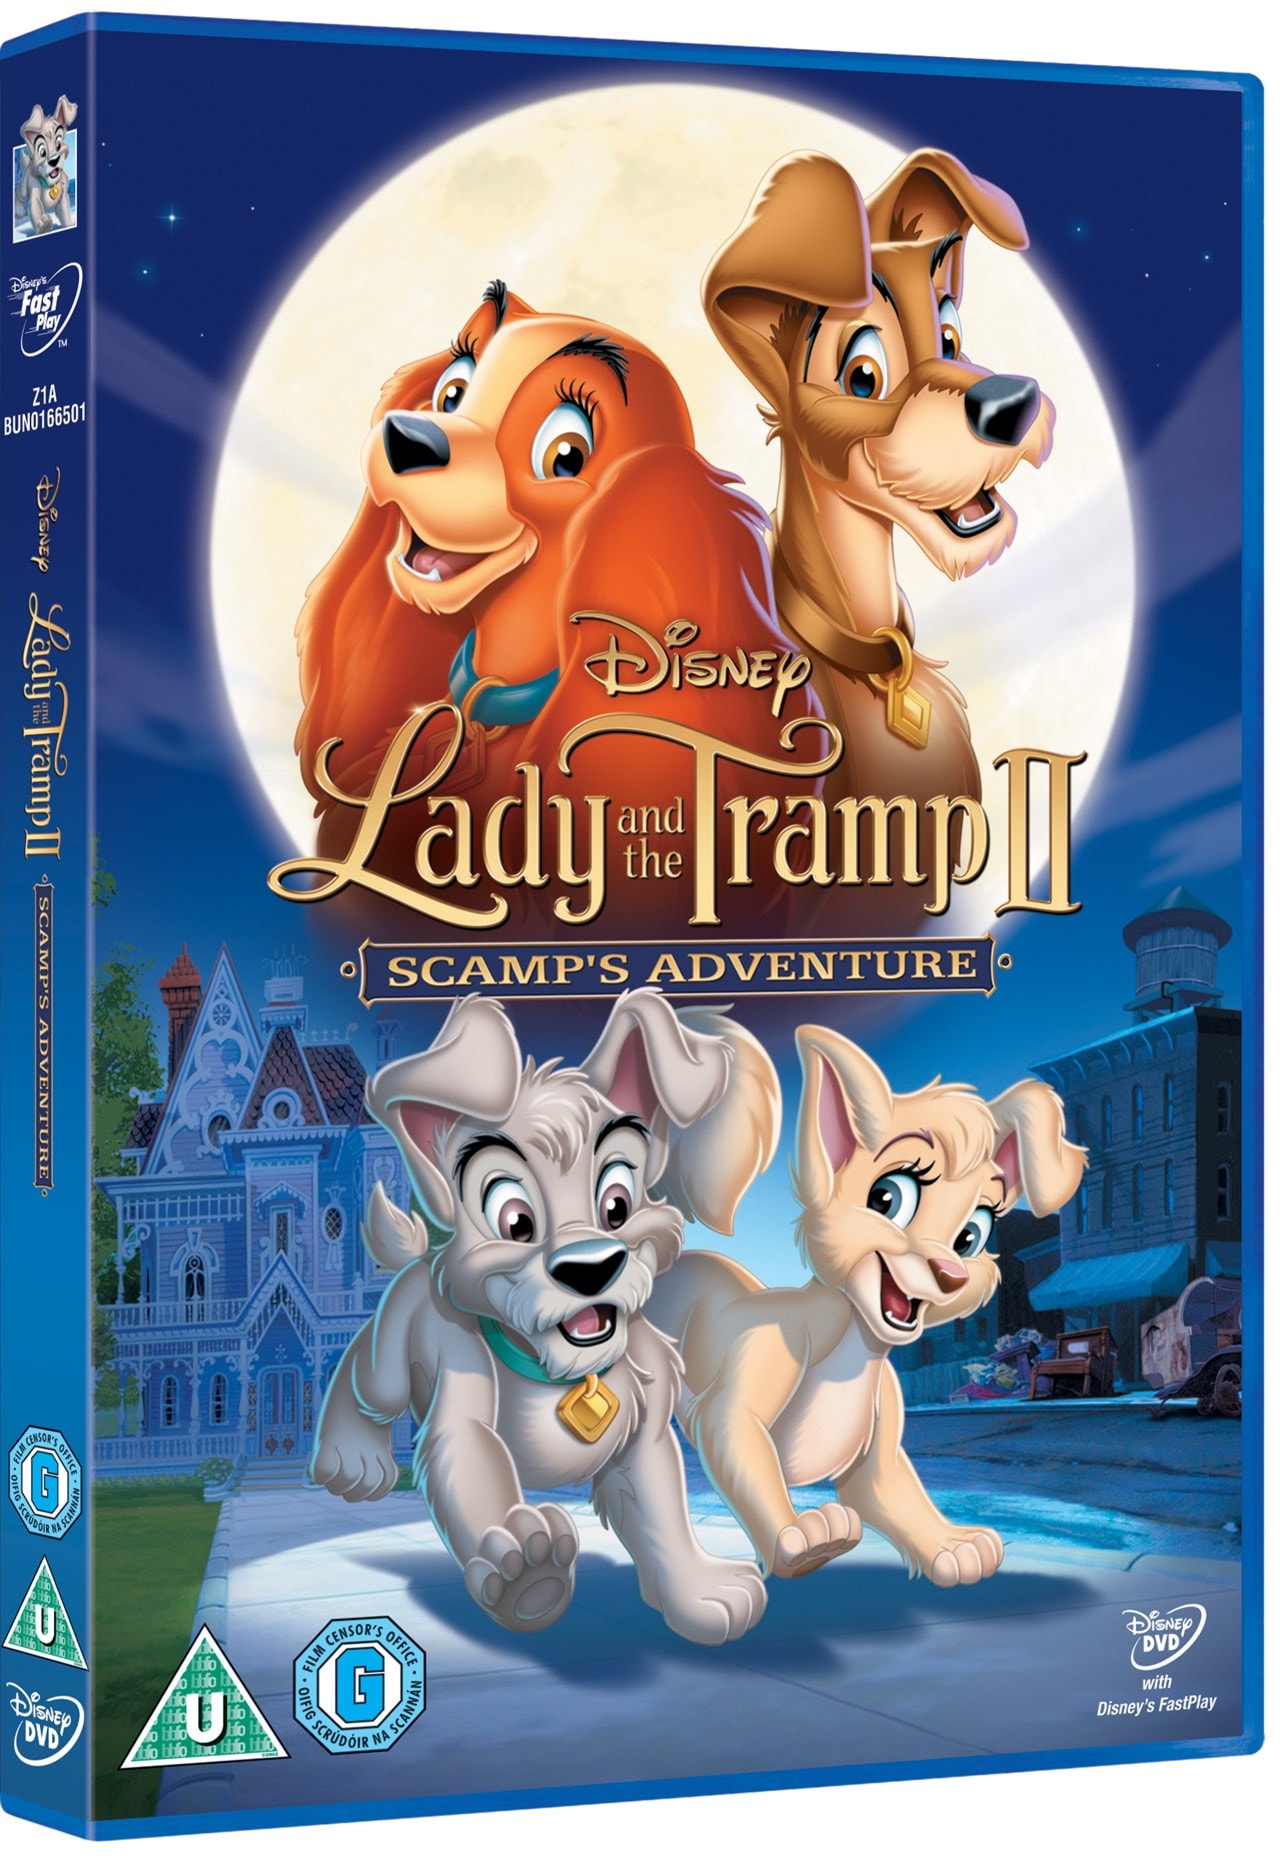 lady-and-the-tramp-2-dvd-free-shipping-over-20-hmv-store